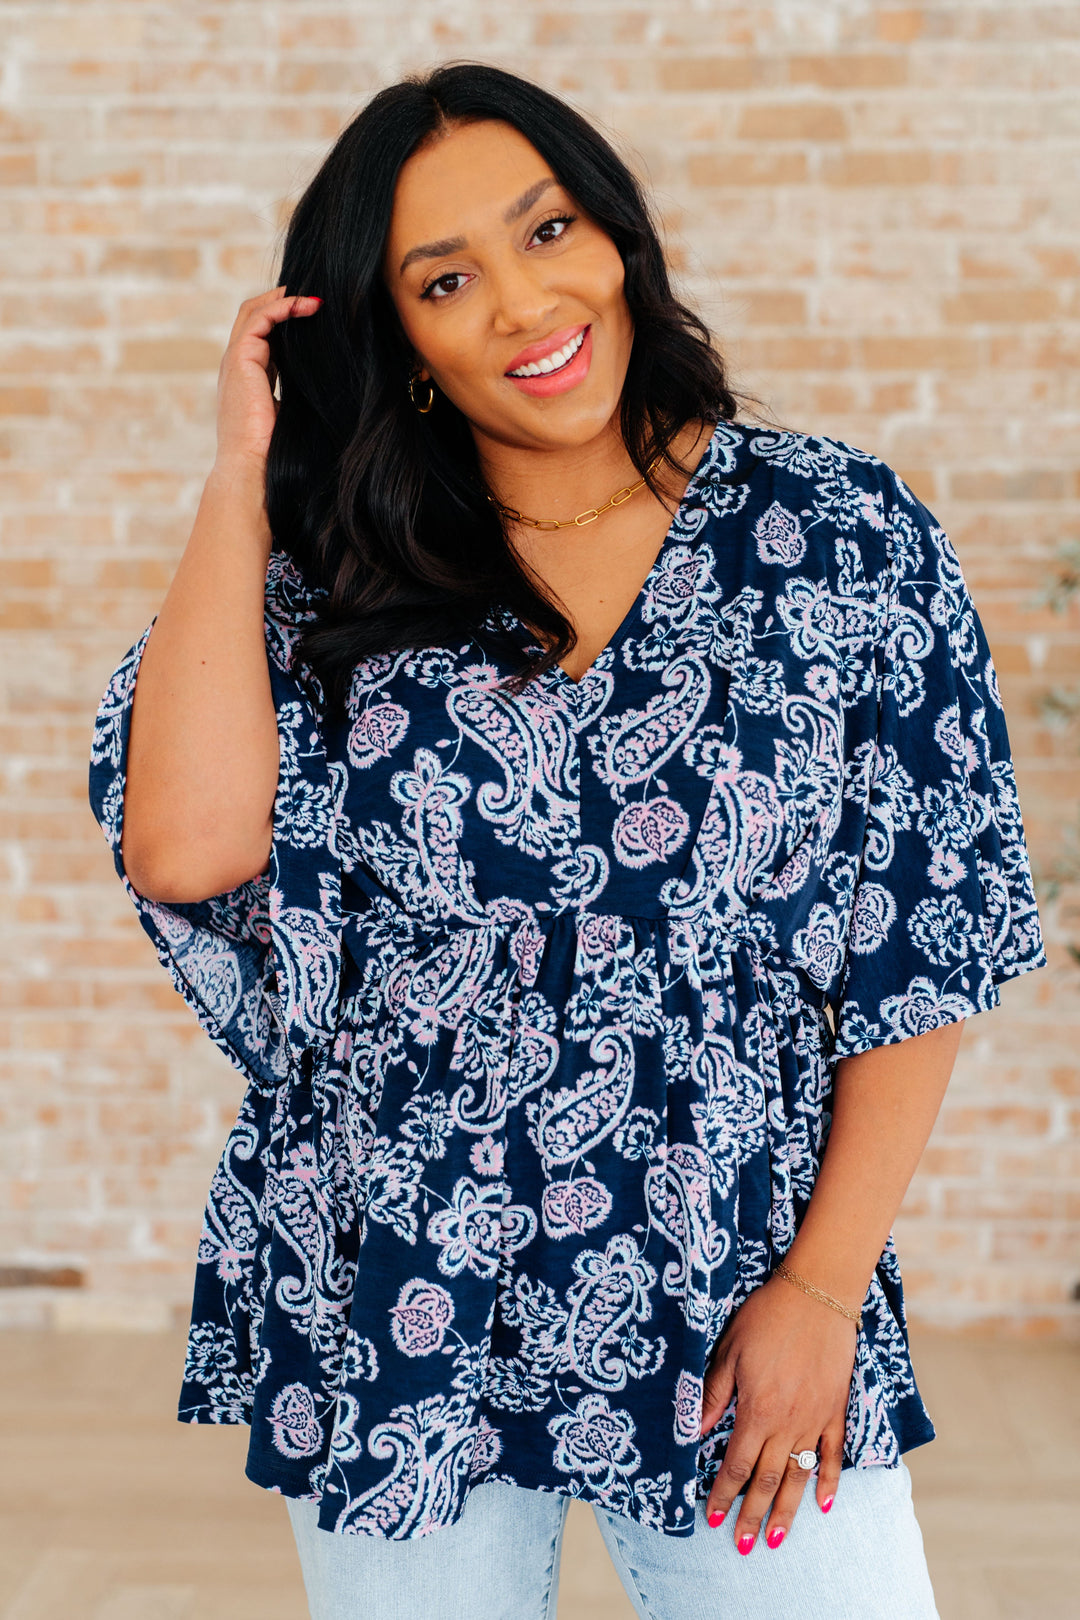 Dreamer Peplum Top in Navy and Pink Paisley-Long Sleeve Tops-Inspired by Justeen-Women's Clothing Boutique in Chicago, Illinois